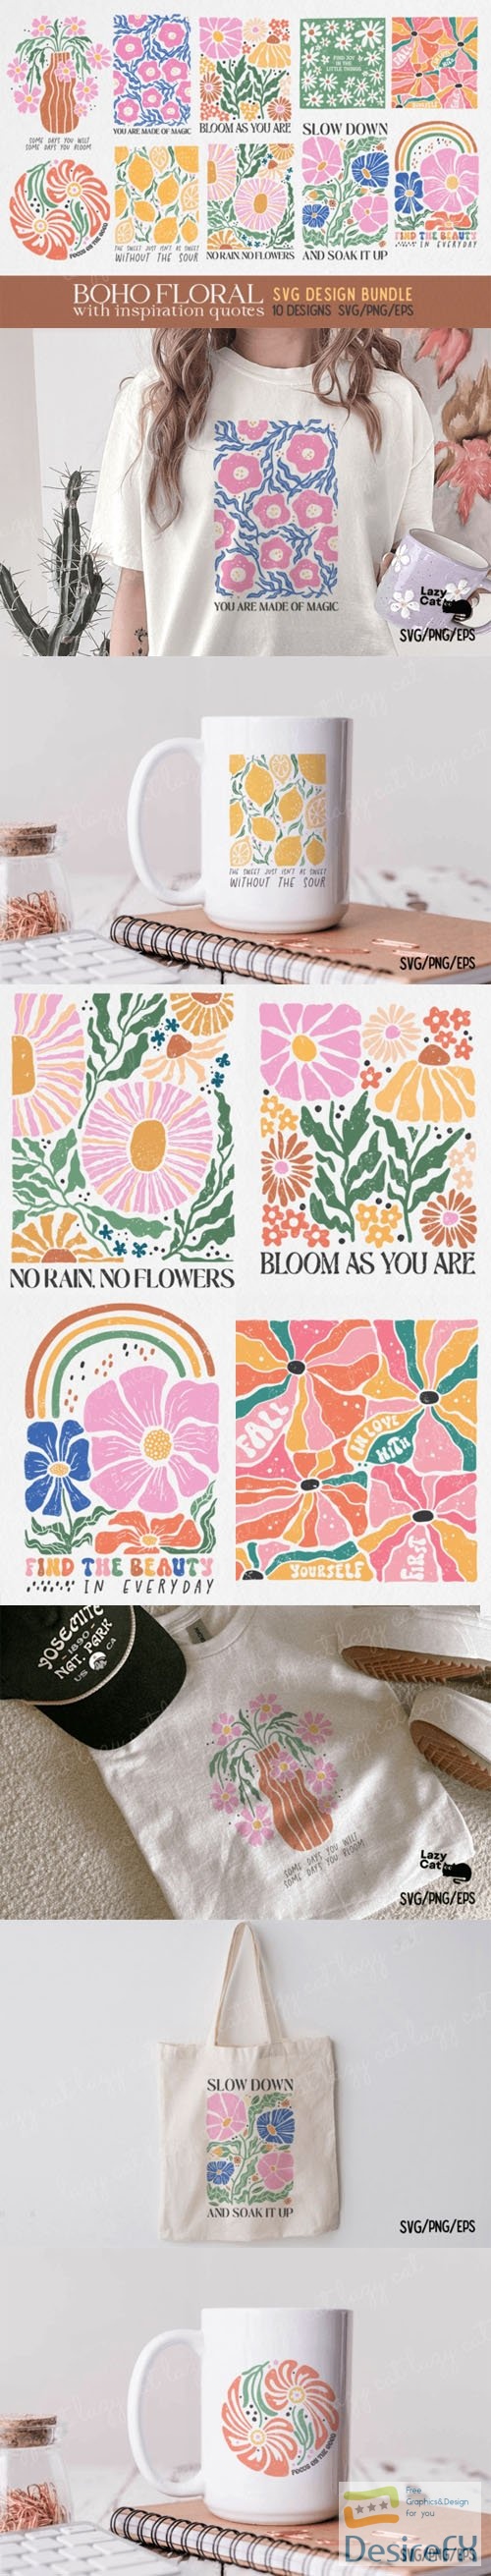 Boho Floral with inspiration Quotes Vector Bundle